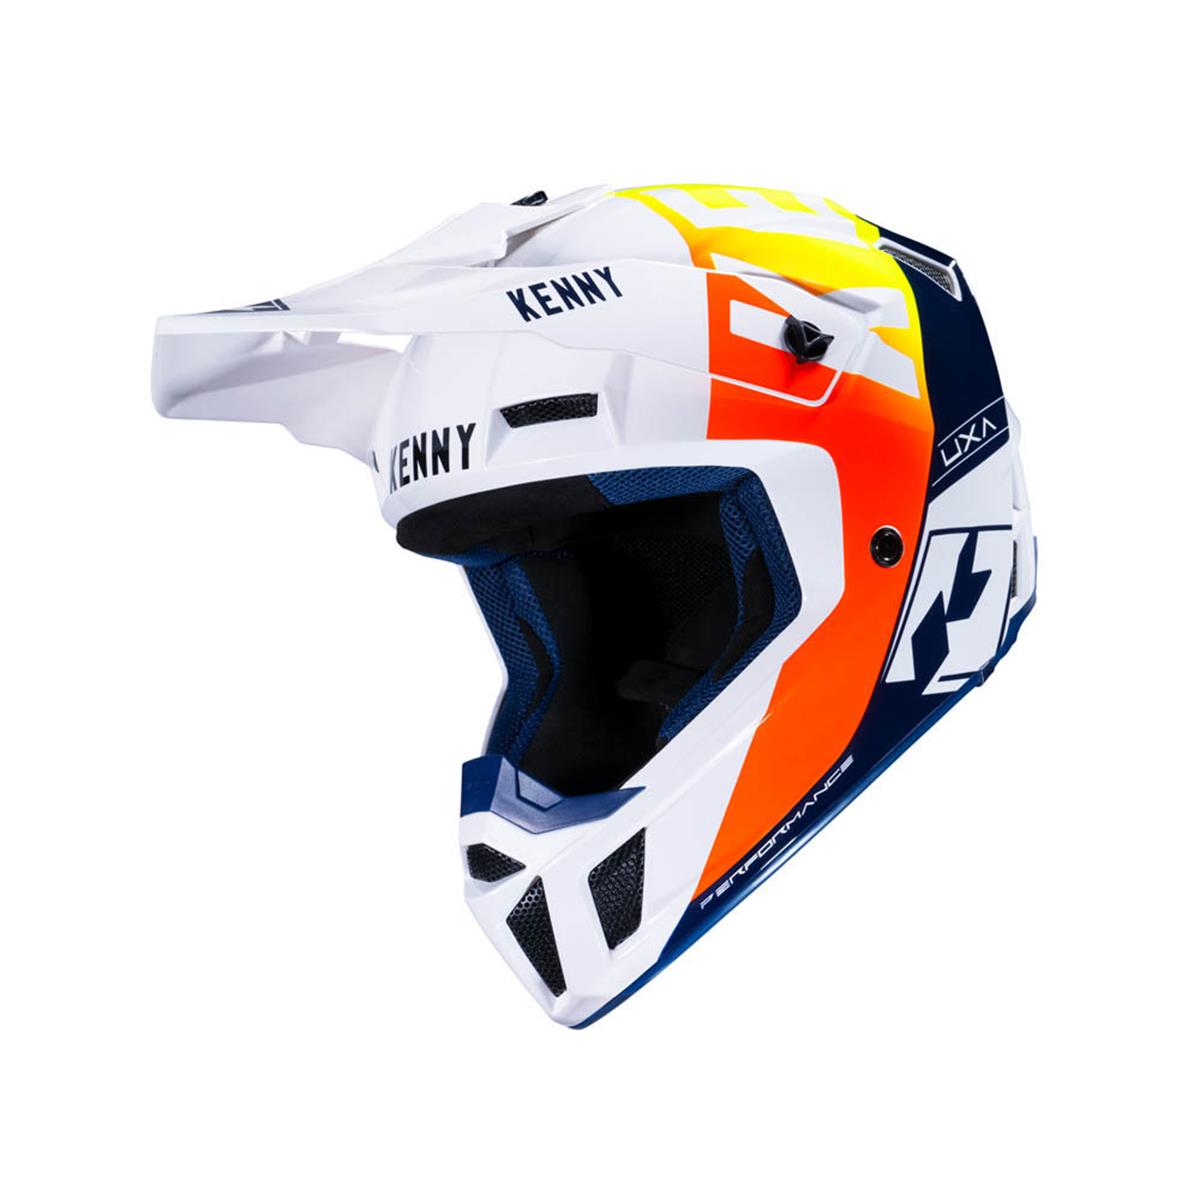 Kenny Motocross-Helm Performance Graphic - Weiß/Navy/Rot